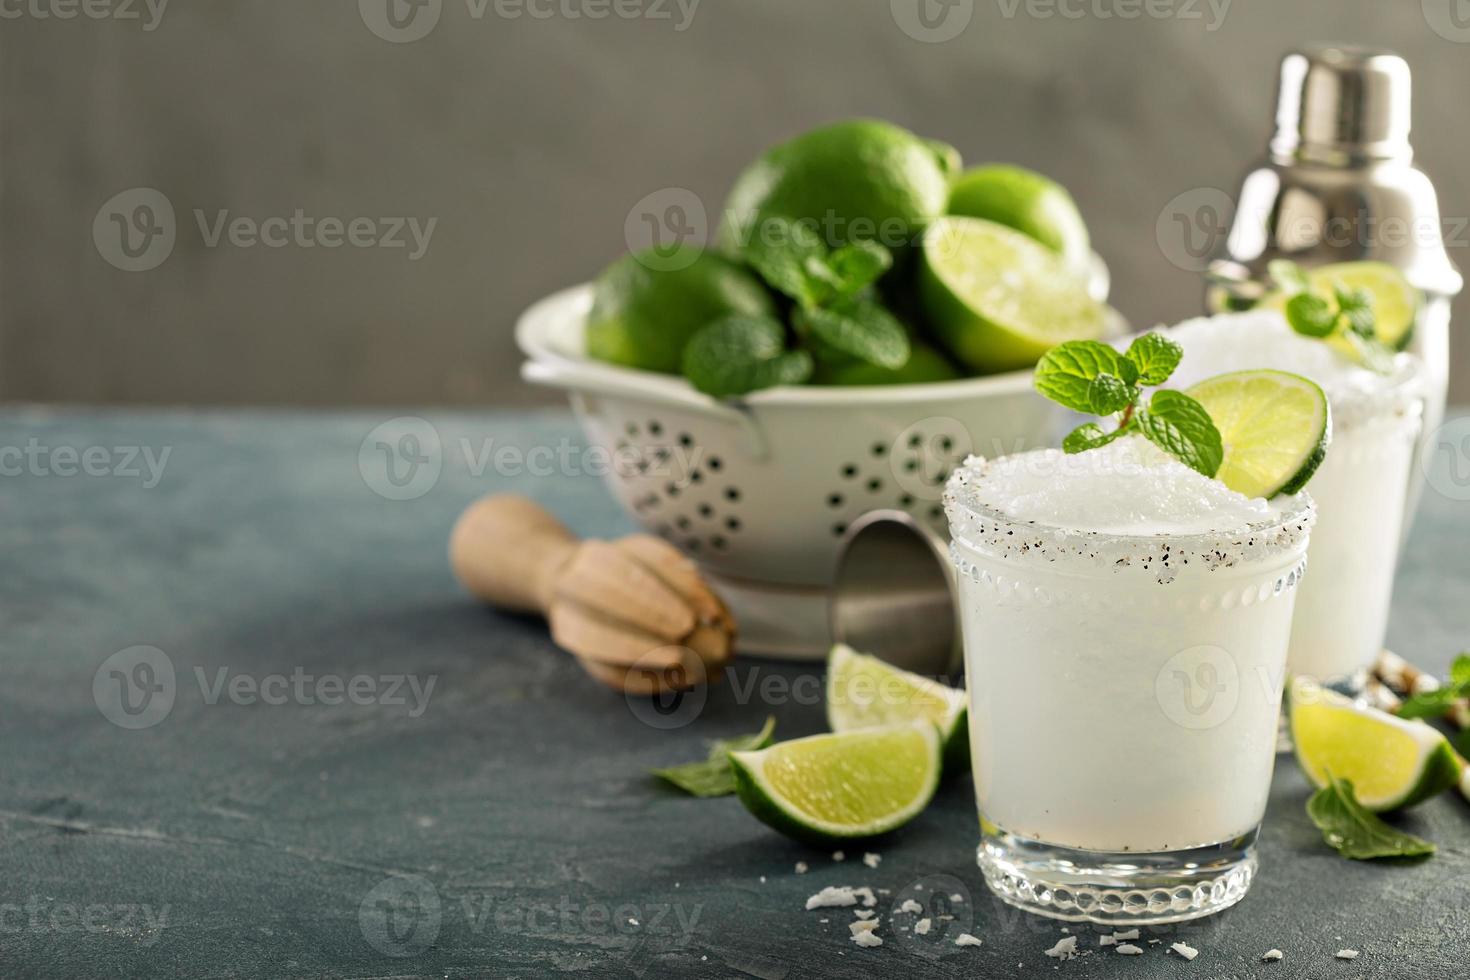 Frozen lime and mint margarita photo